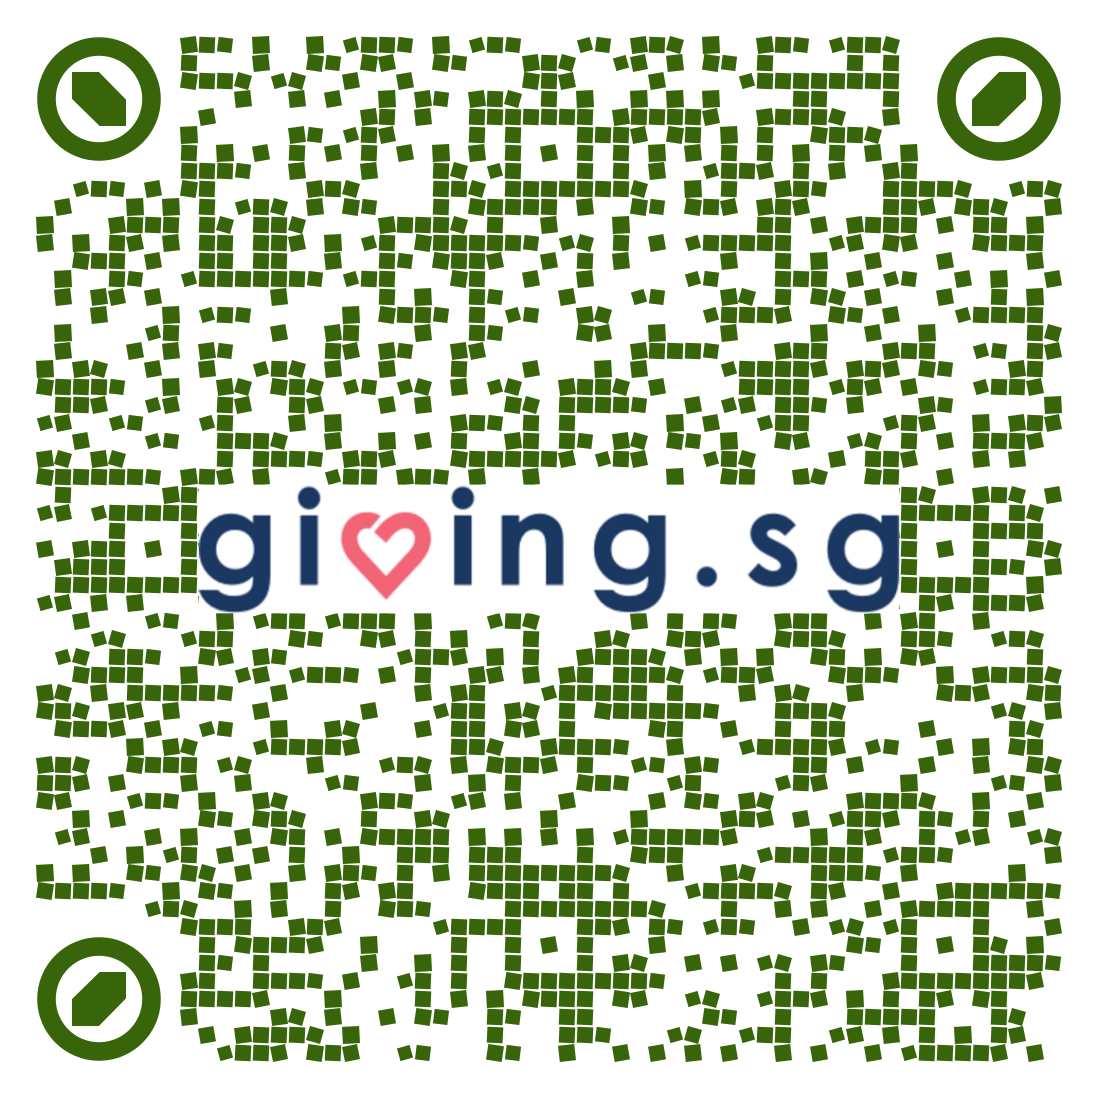 Giving.sg Q3 2022 (Use this)